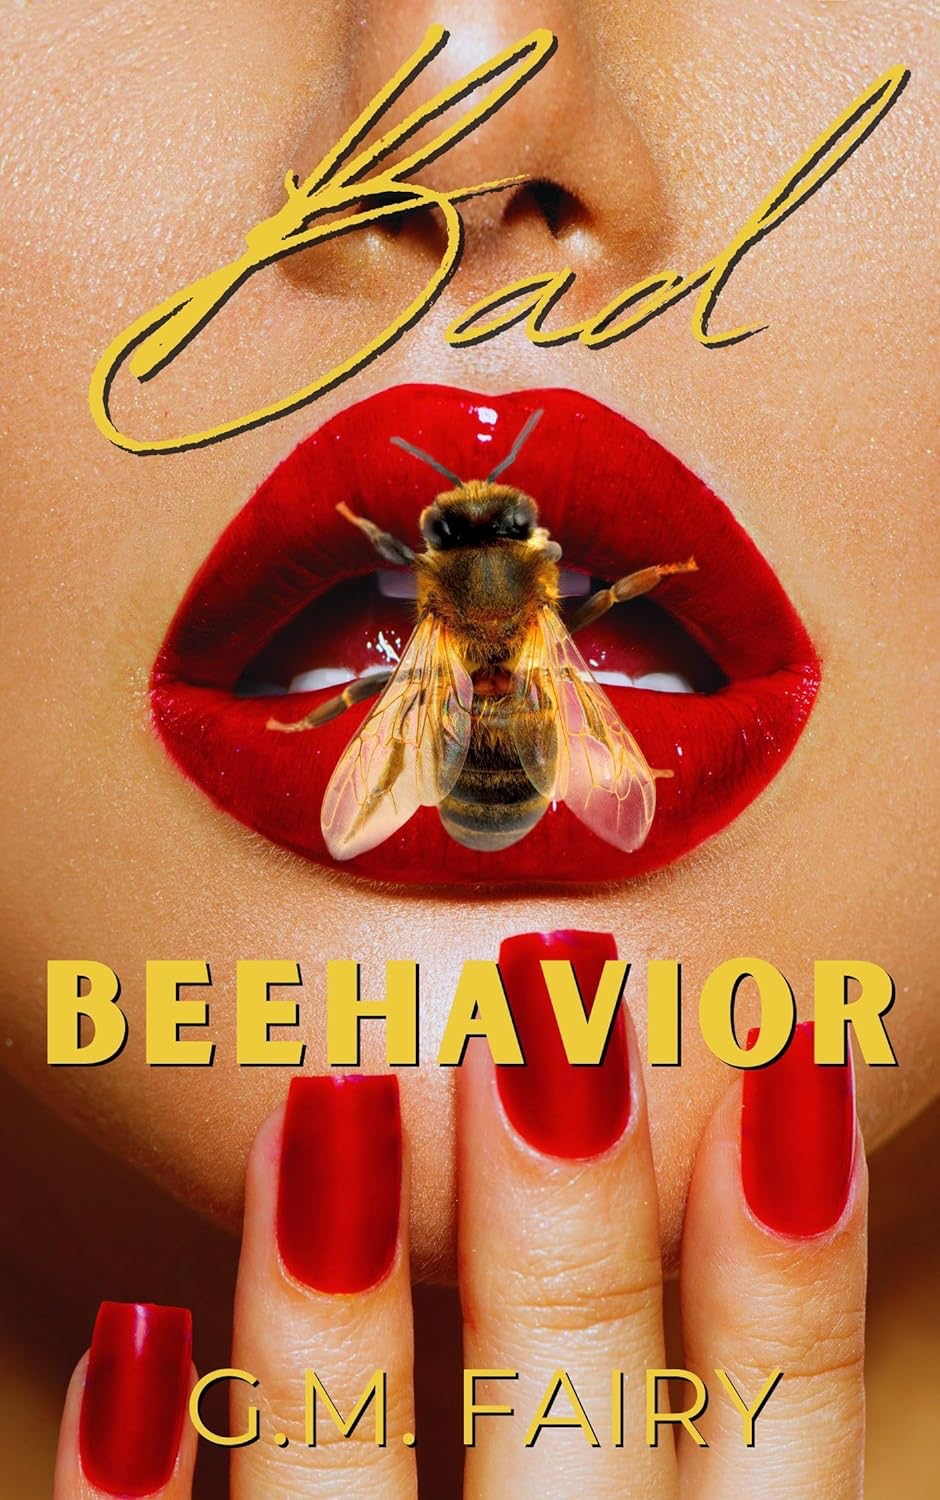 BOOK REVIEW: Bad Beehavior, by G.M. Fairy